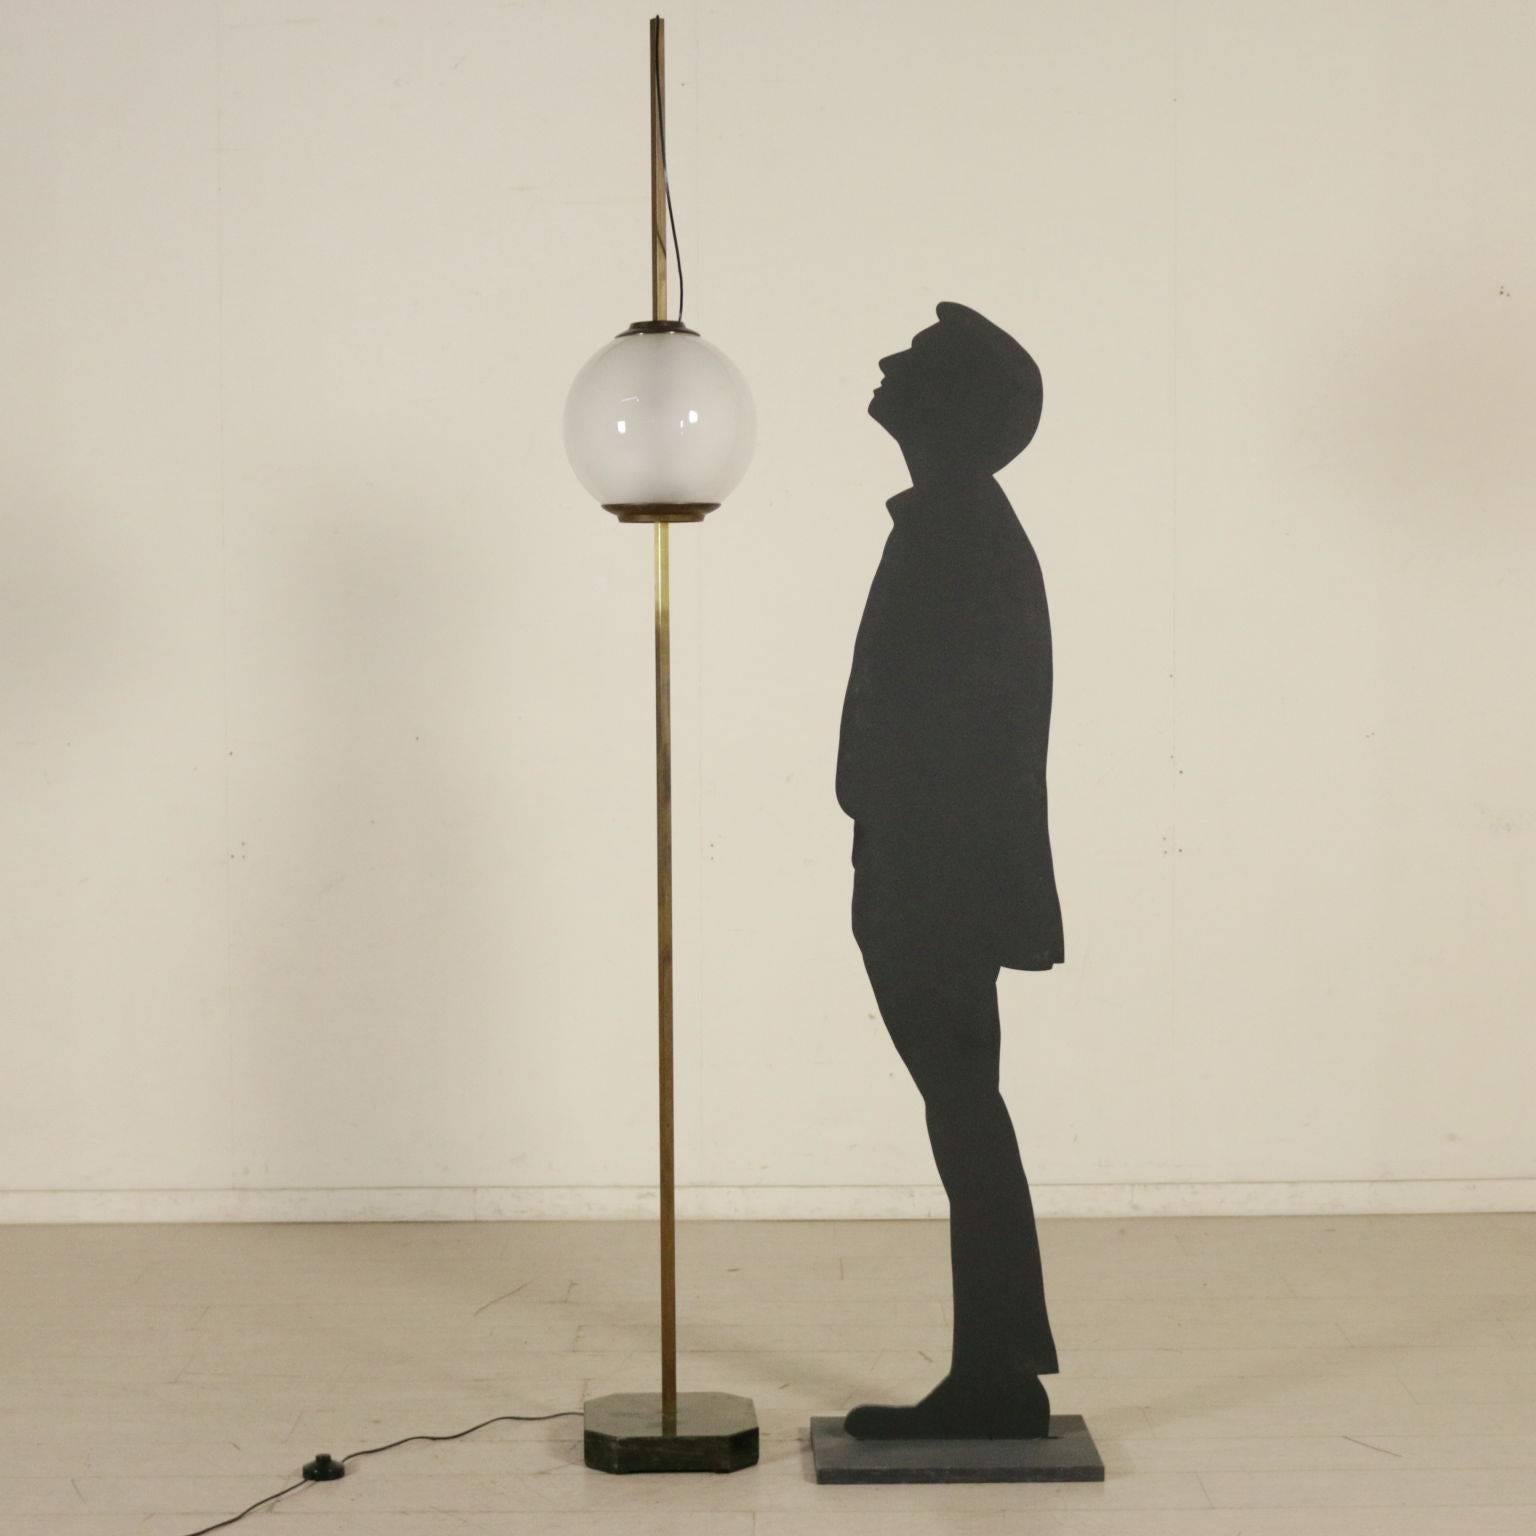 A floor lamp designed by Luigi Caccia Dominioni for Azucena, brass, glass and marble basement. Model: Lte 10. Manufactured in Italy, 1950s-1960s.